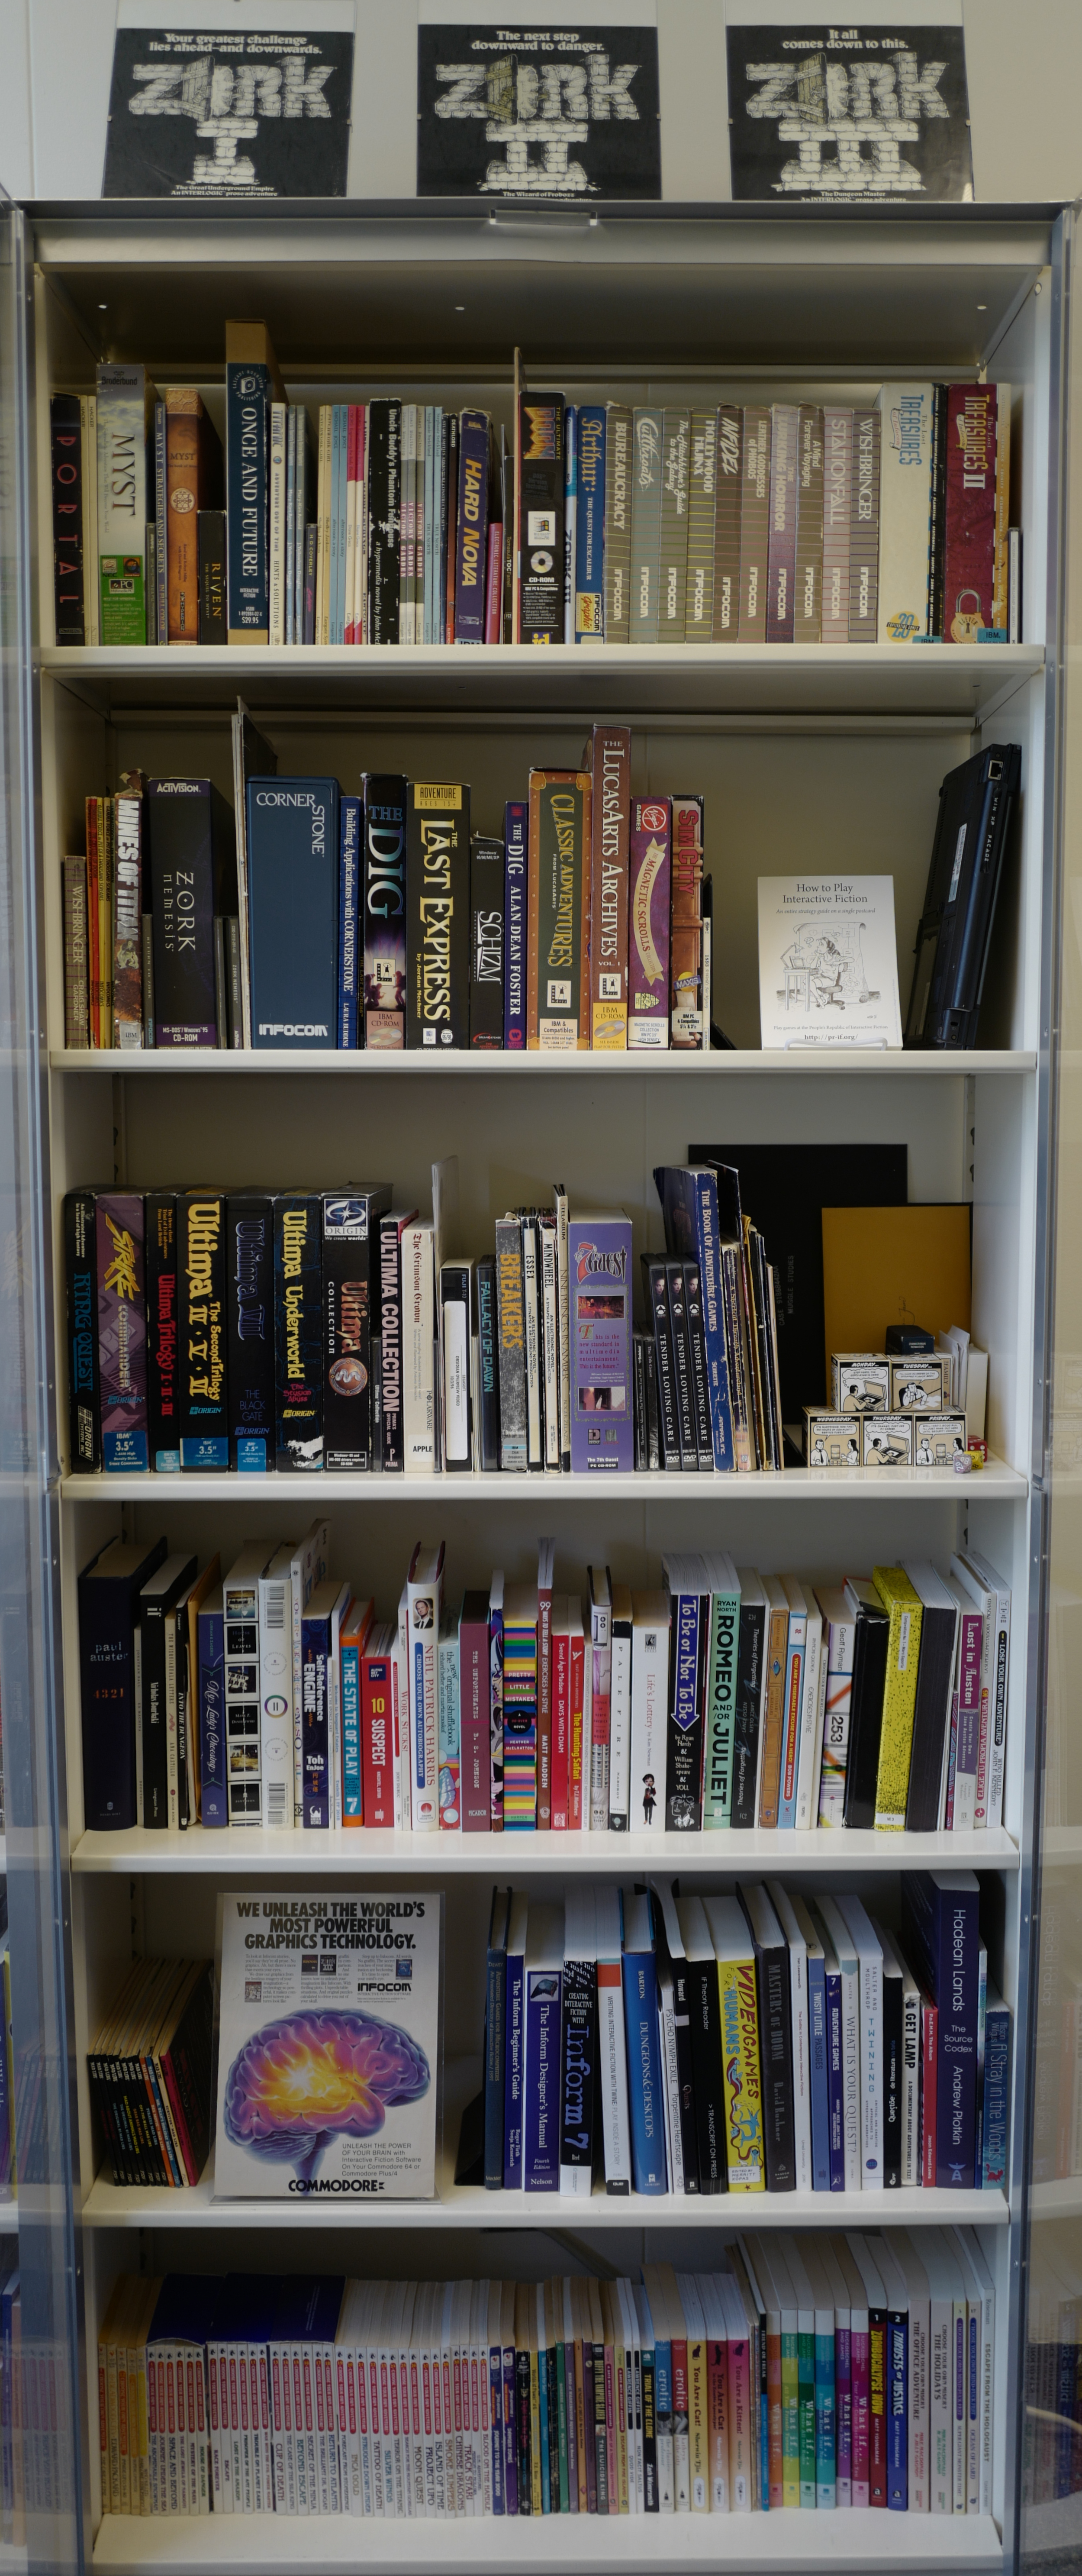 The Interactive Narrative Collection, with software, books, and more. Not the way it is currently shelved!